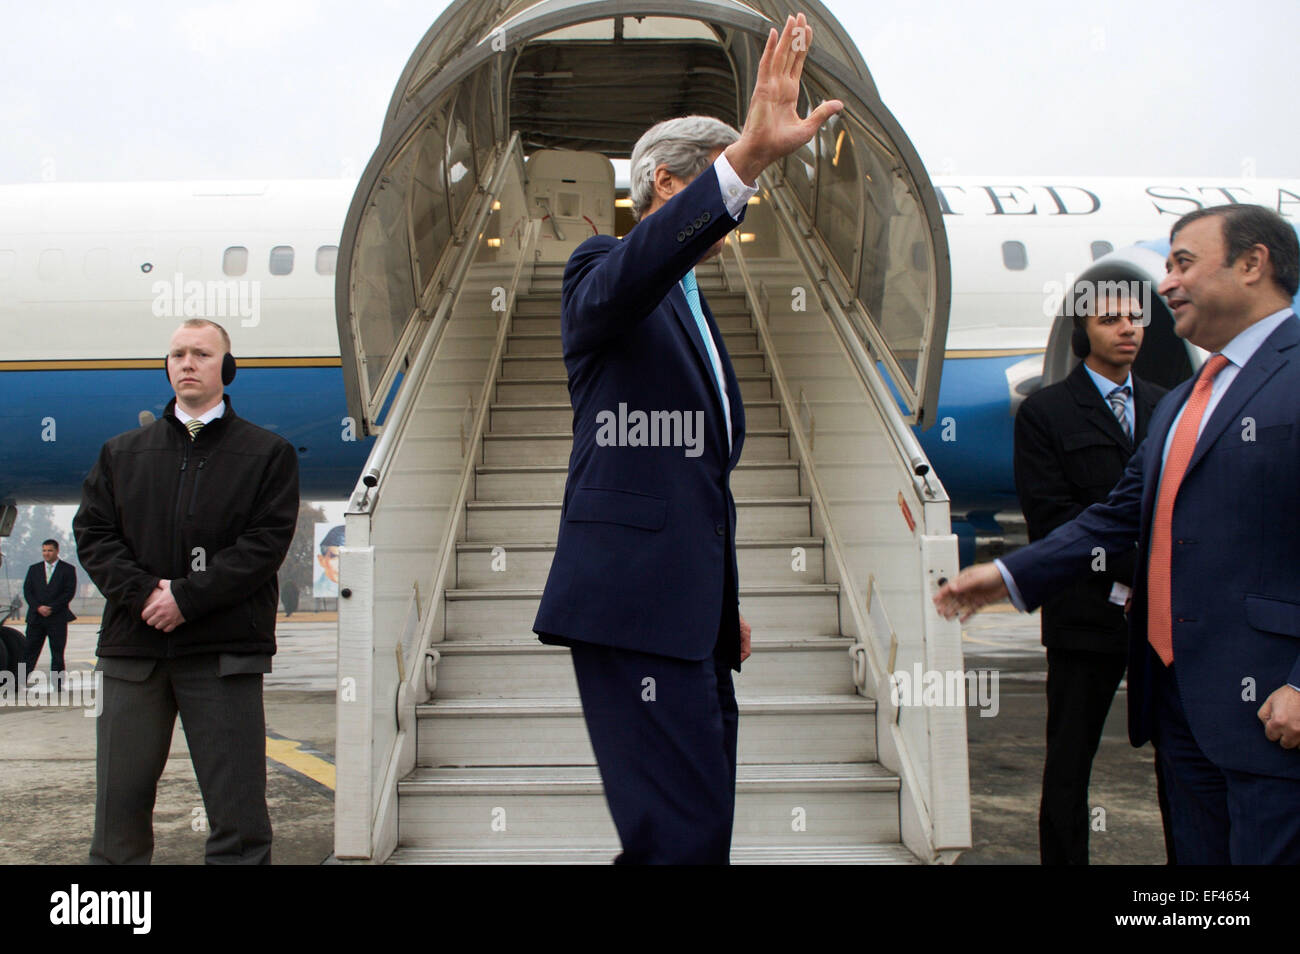 U.S. Secretary of State John Kerry waves goodbye to well-wishers as he departs from Islamabad, Pakistan, after meetings with government and military leaders and heads to Geneva, Switzerland, on January 13, 2015, to resume nuclear negotiations with Iranian Foreign Minister Javad Zarif. Stock Photo